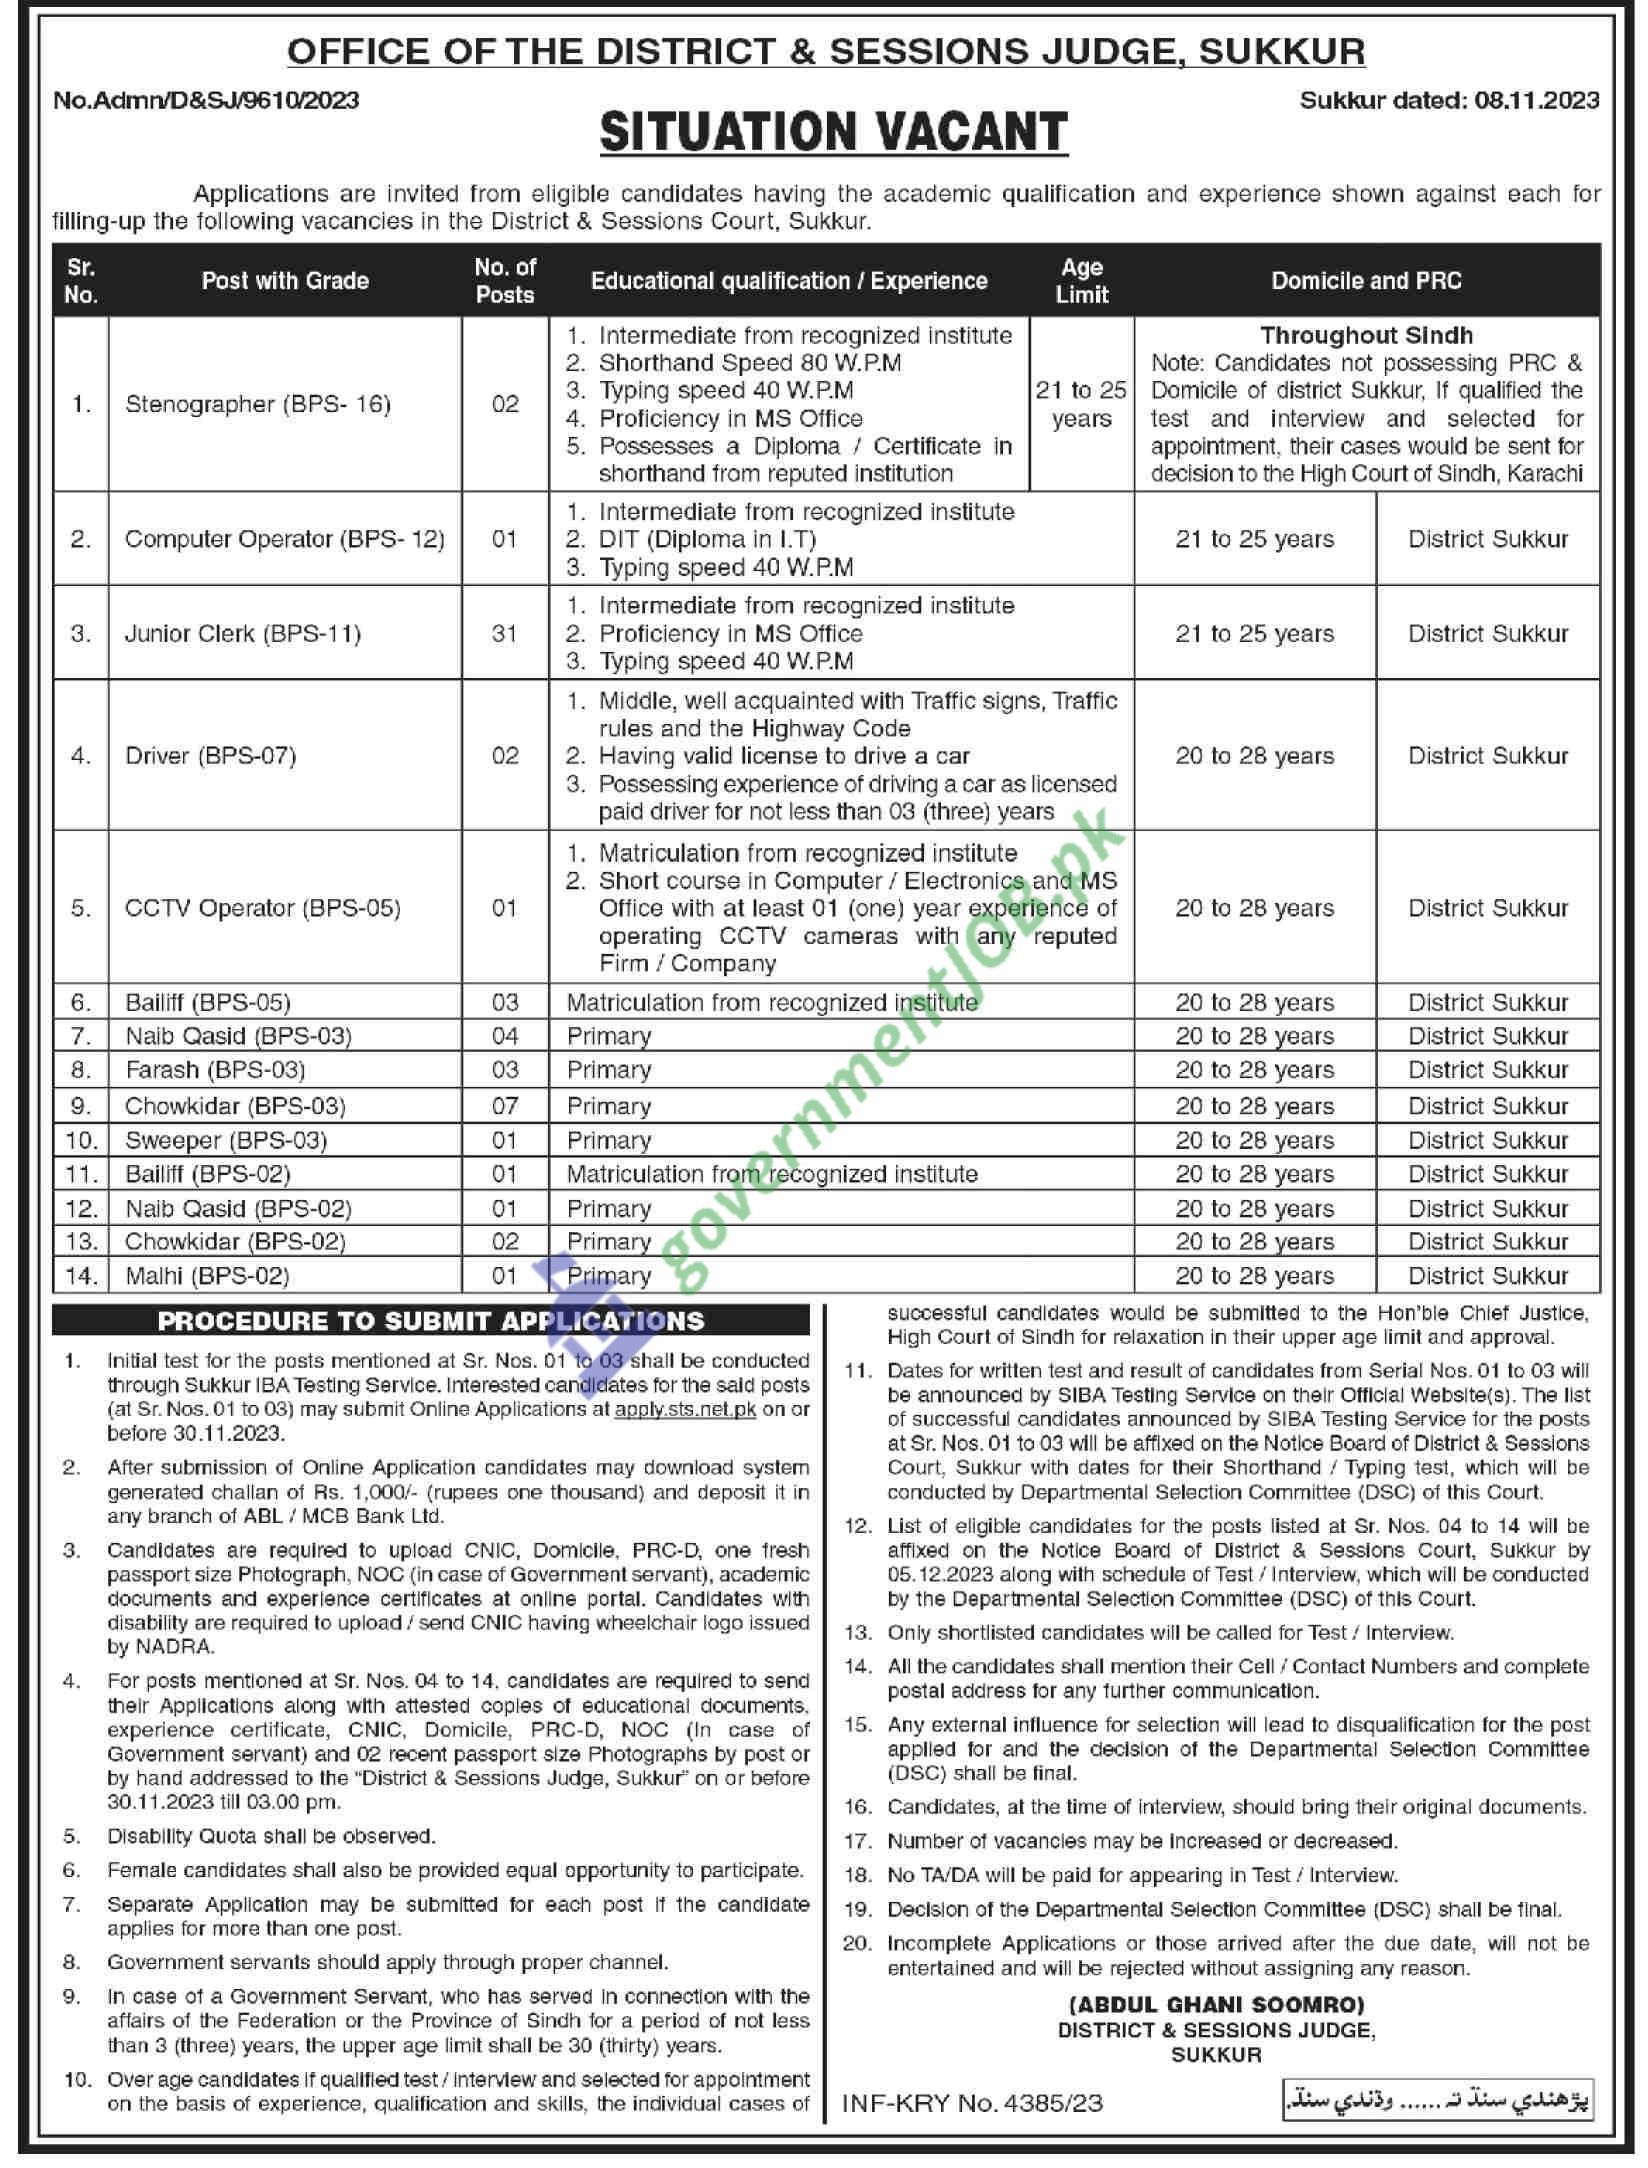 Office of the District and Session Judge Sukkur JObs